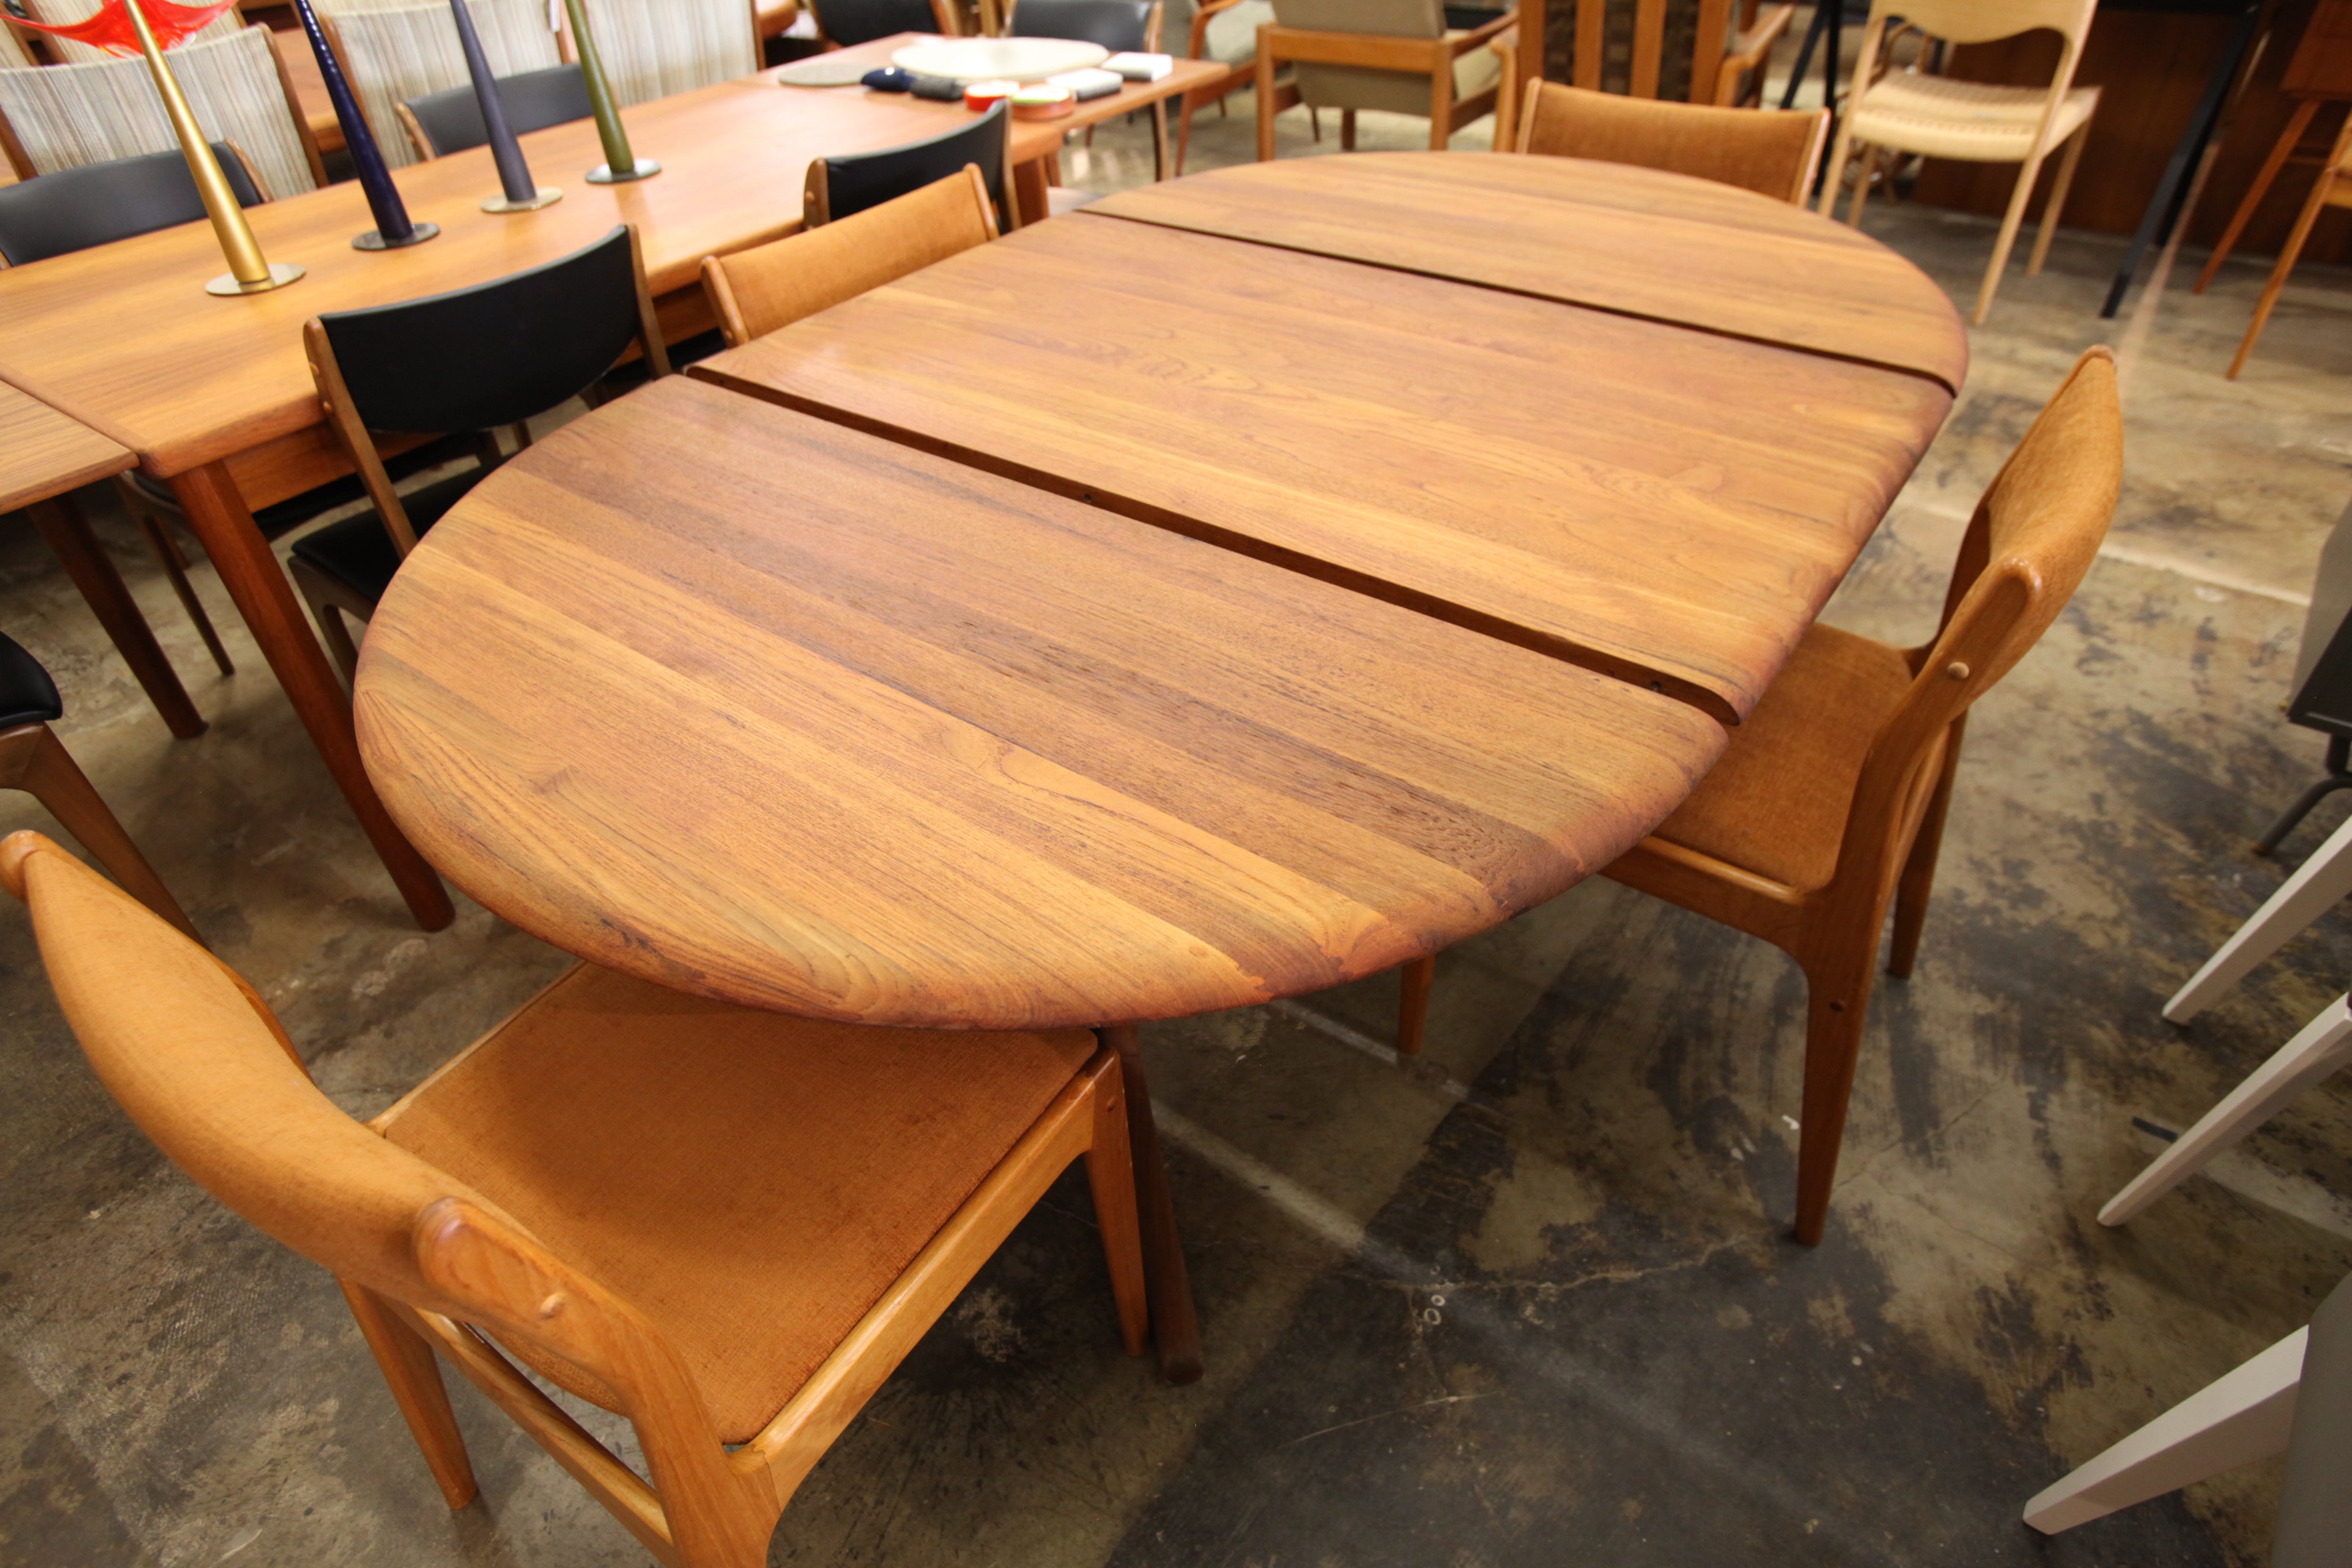 Vintage Round "SOLID TEAK" Dining Table w/ One Leaf (47" Round Dia or 47" x 72")